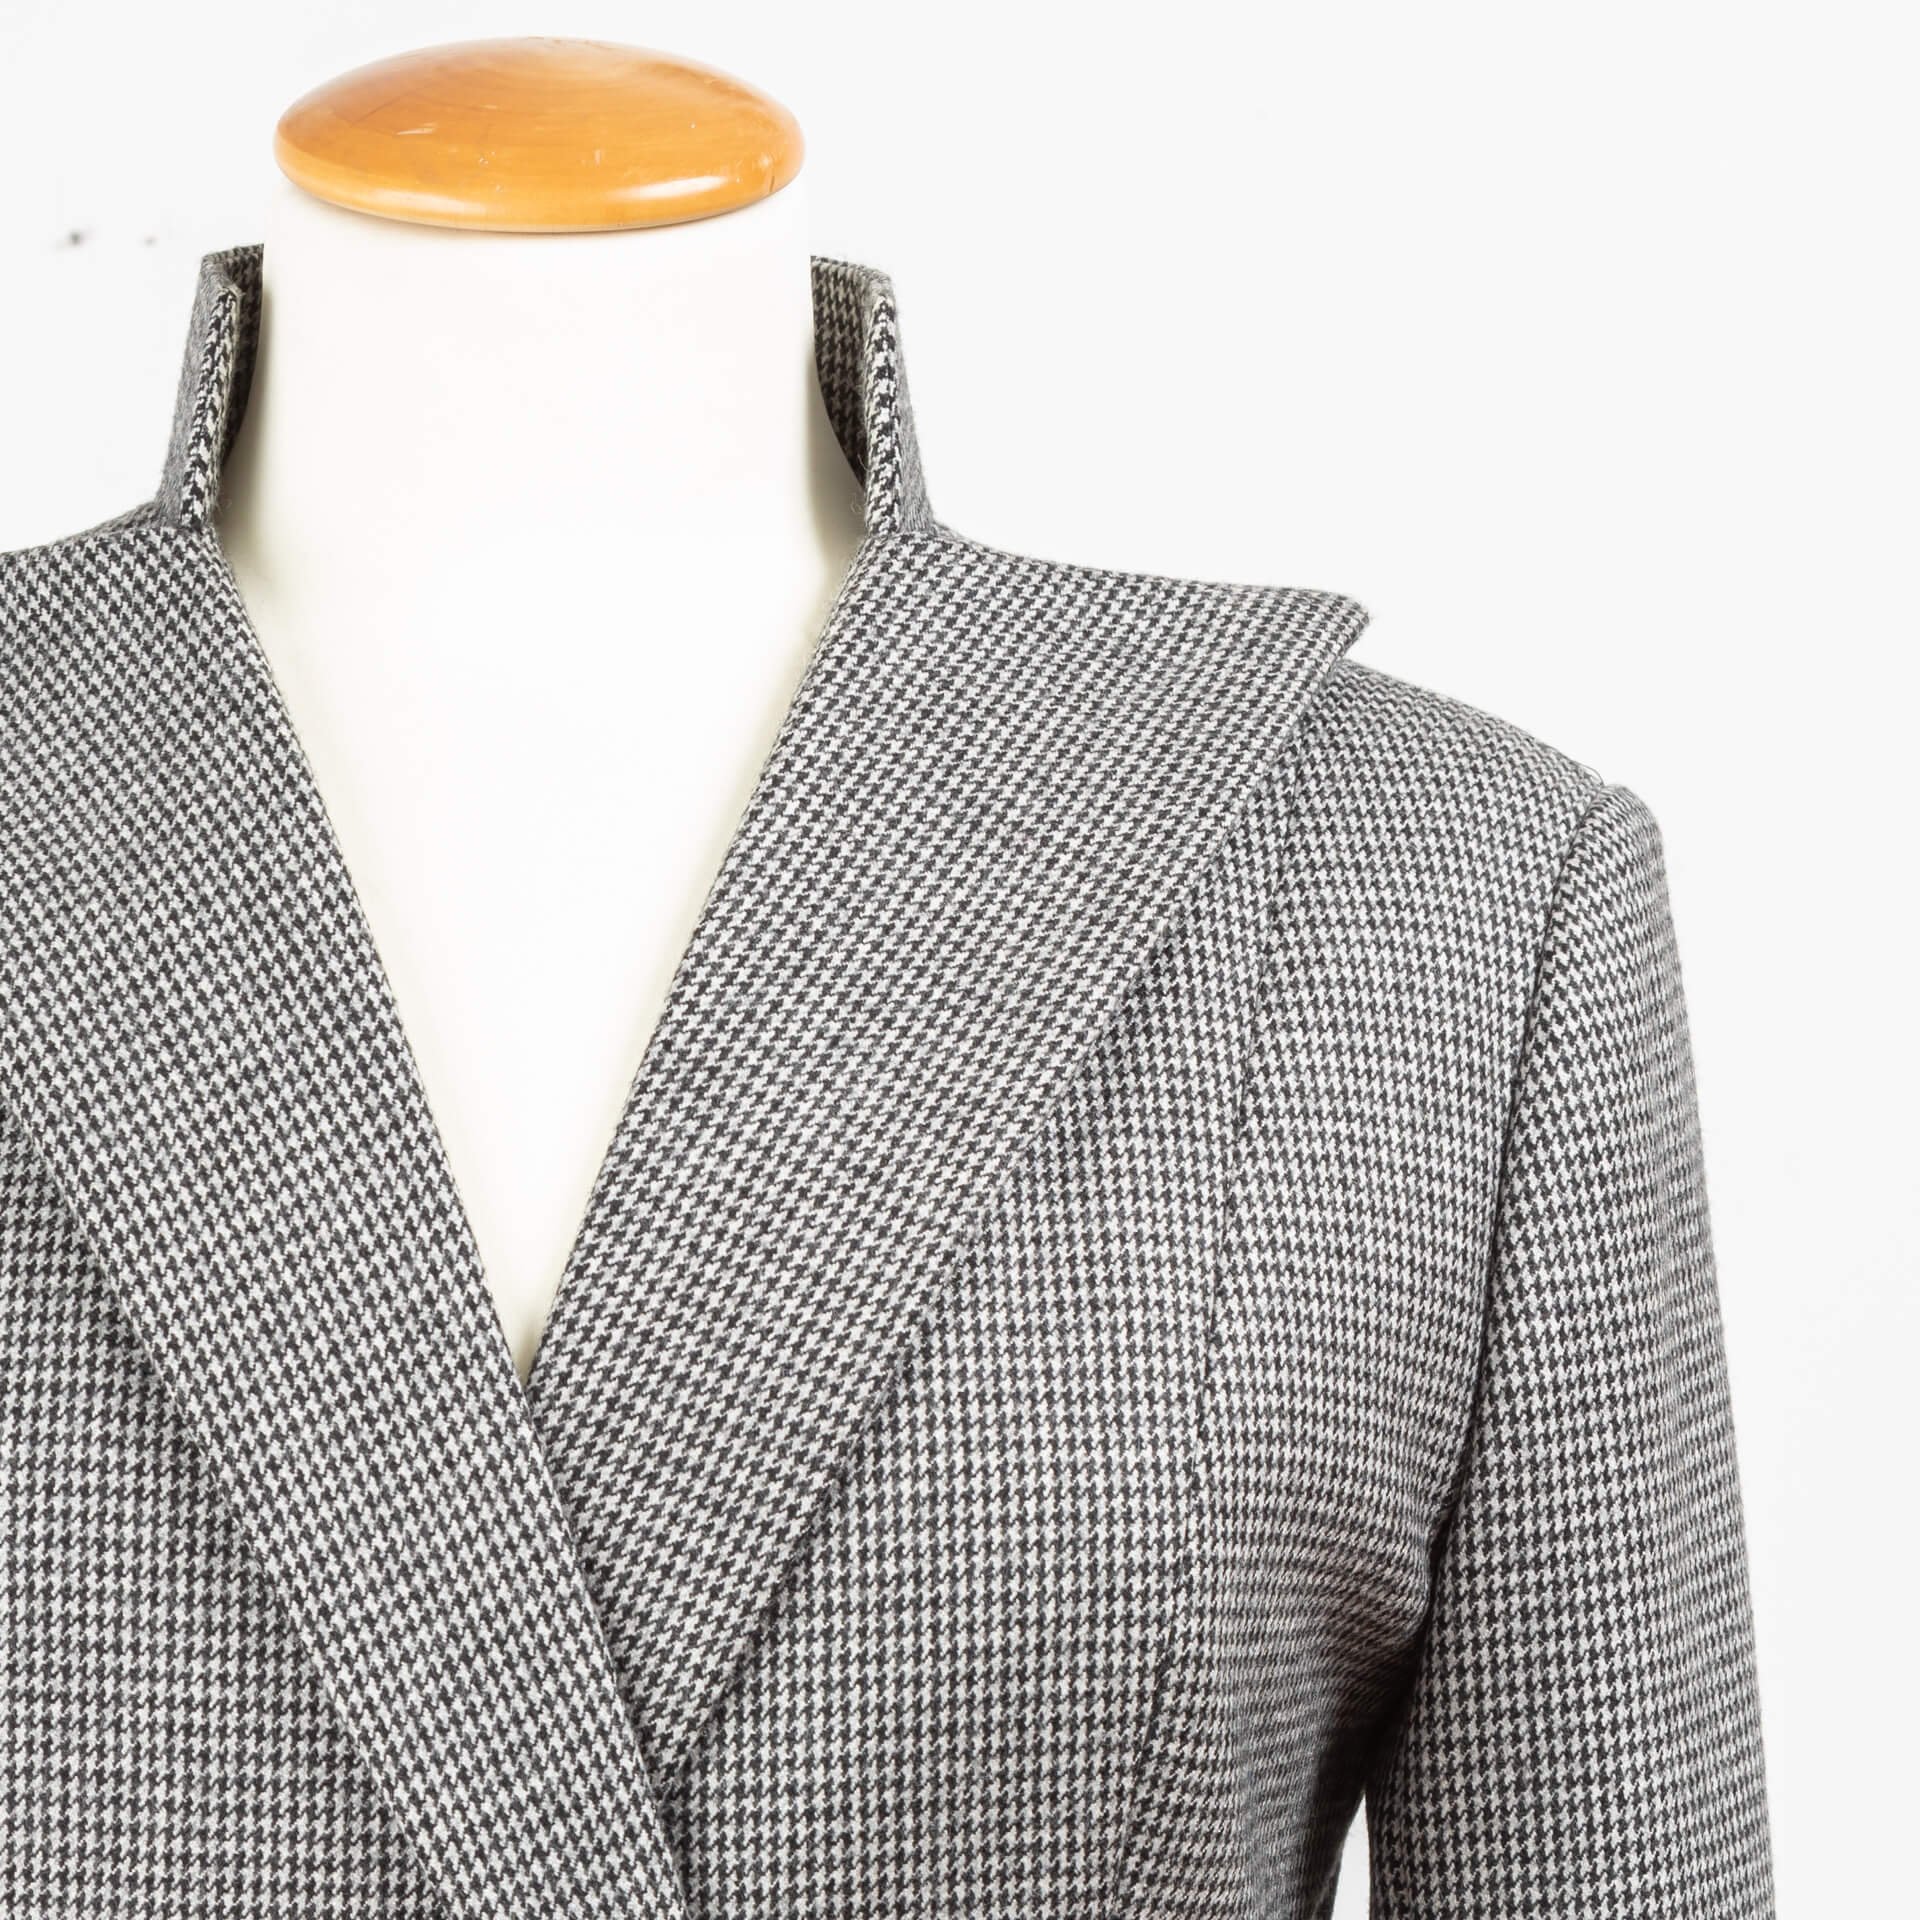 Blazer Double Breasted Stand-Up Collar Pied De Poule Houndstooth.